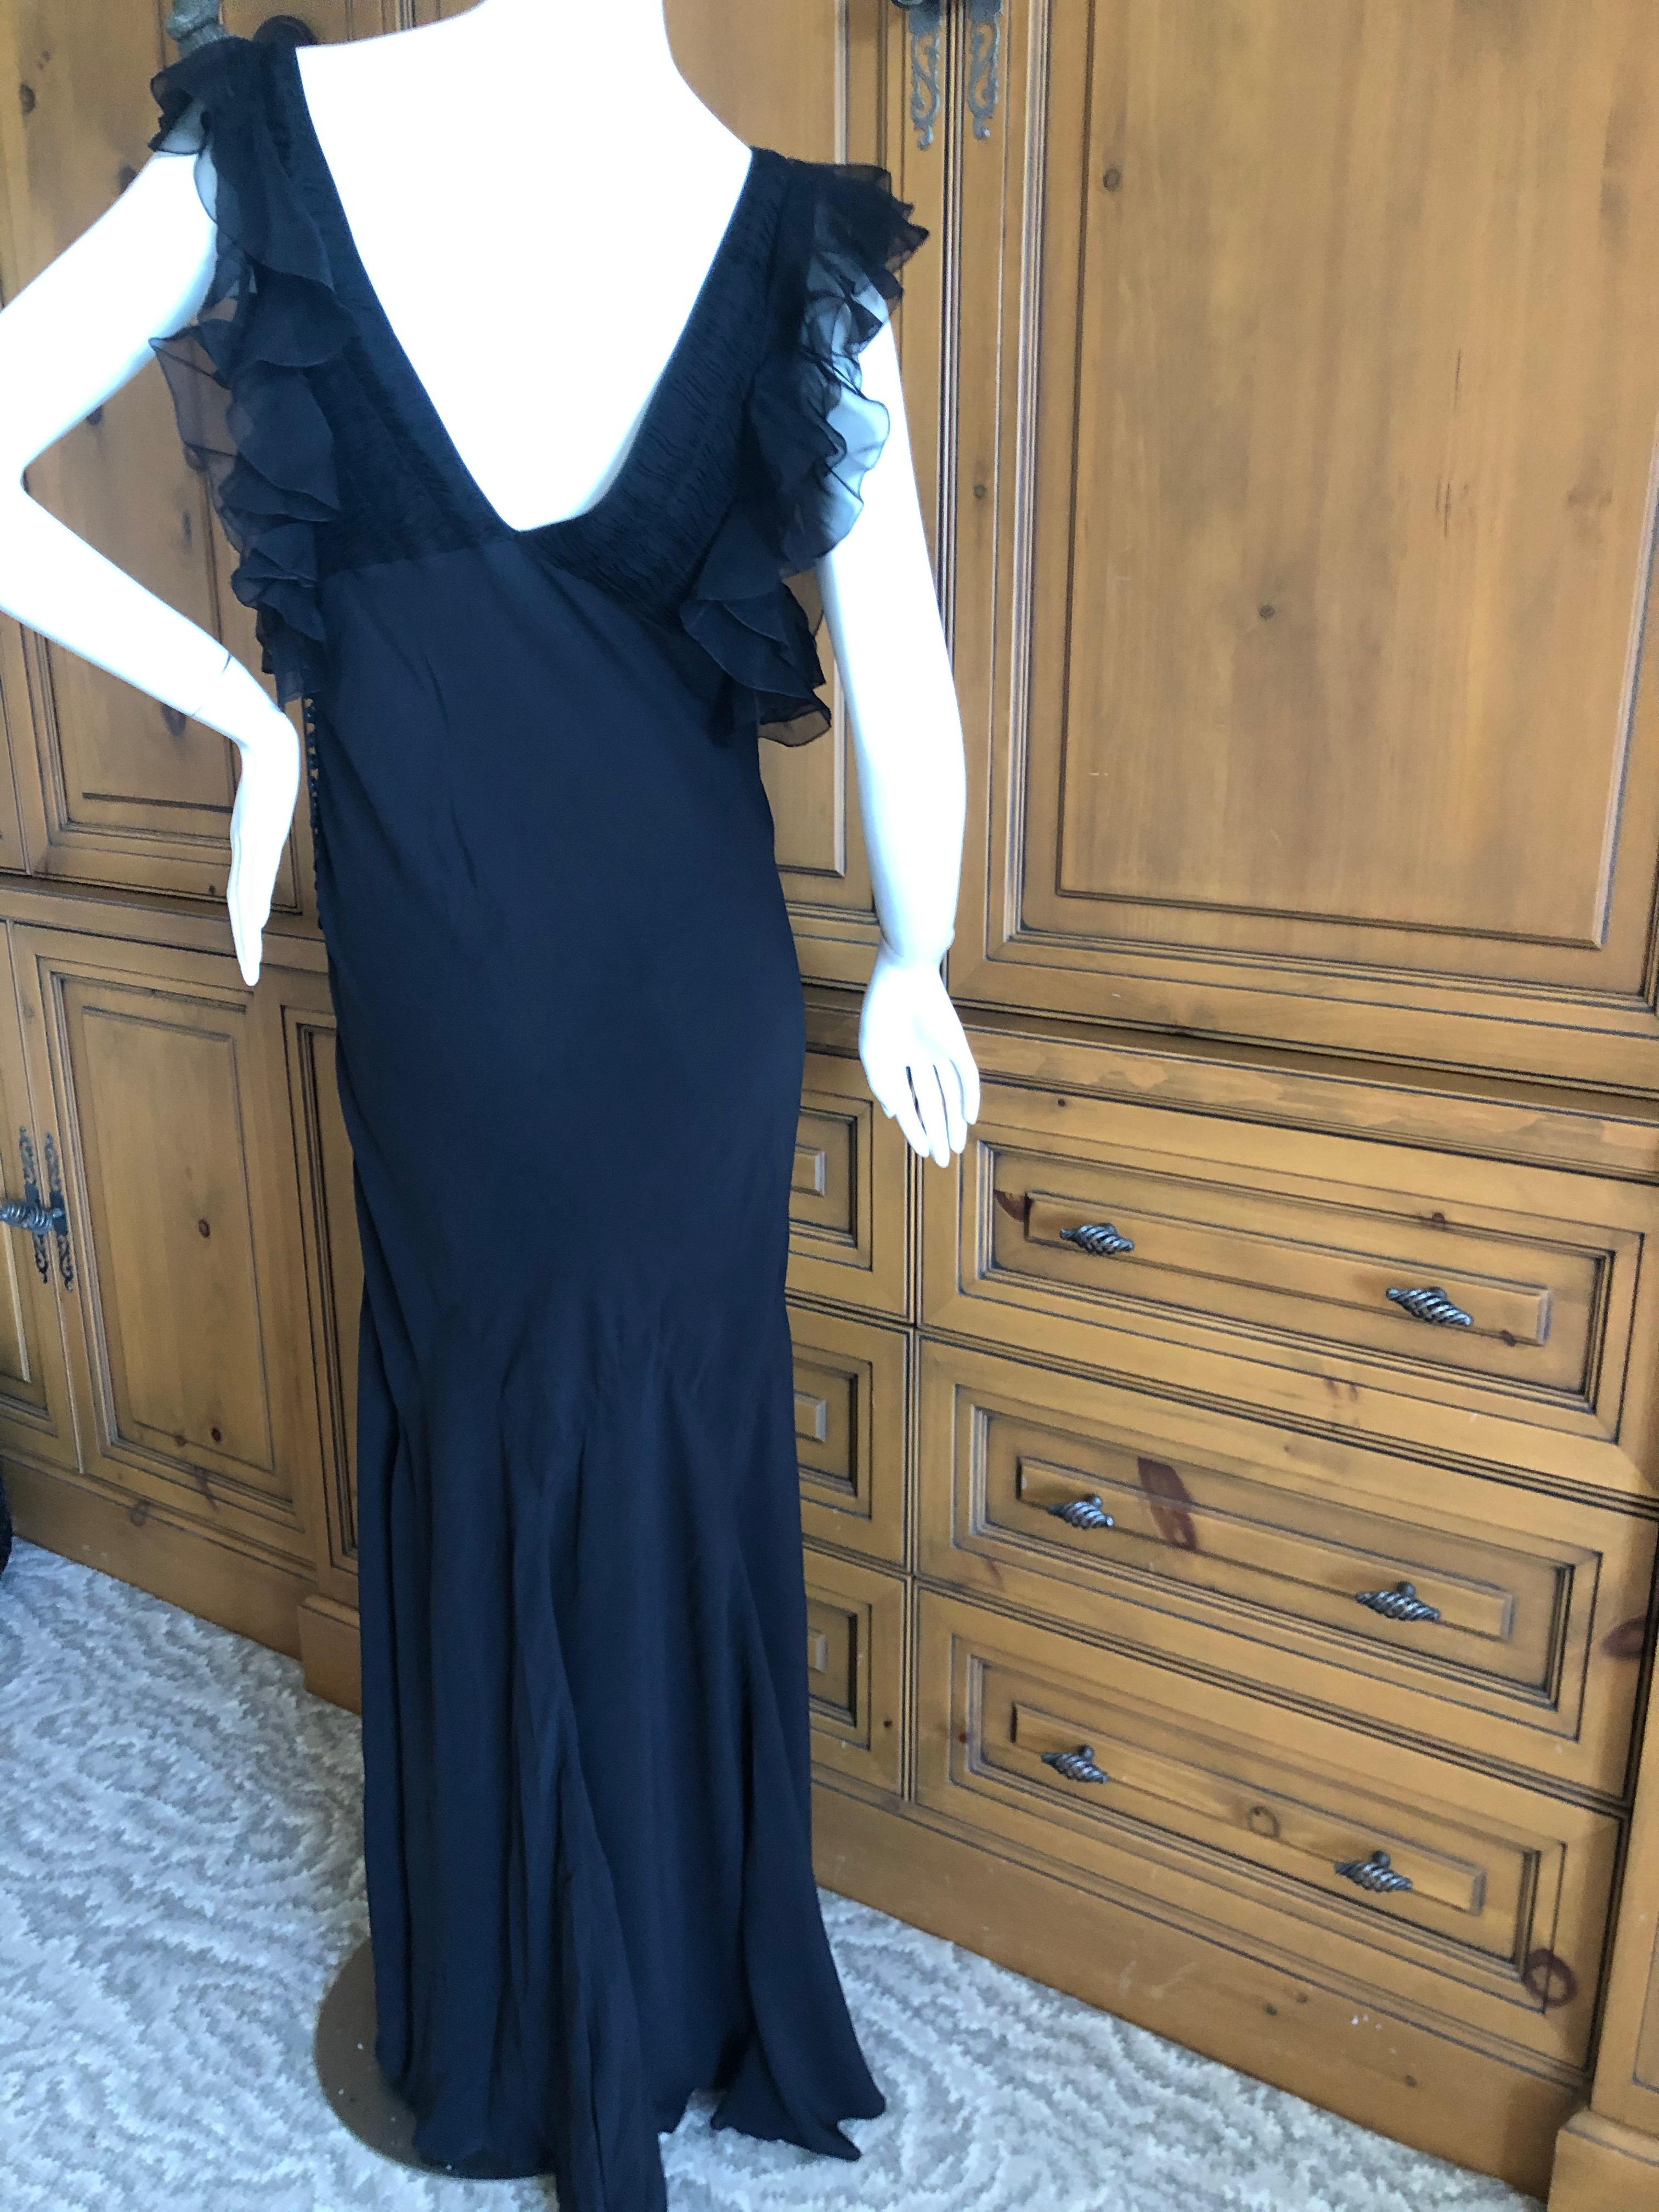 John Galliano Vintage Black Bias Cut Empire Style Evening Dress with Ruffles For Sale 6